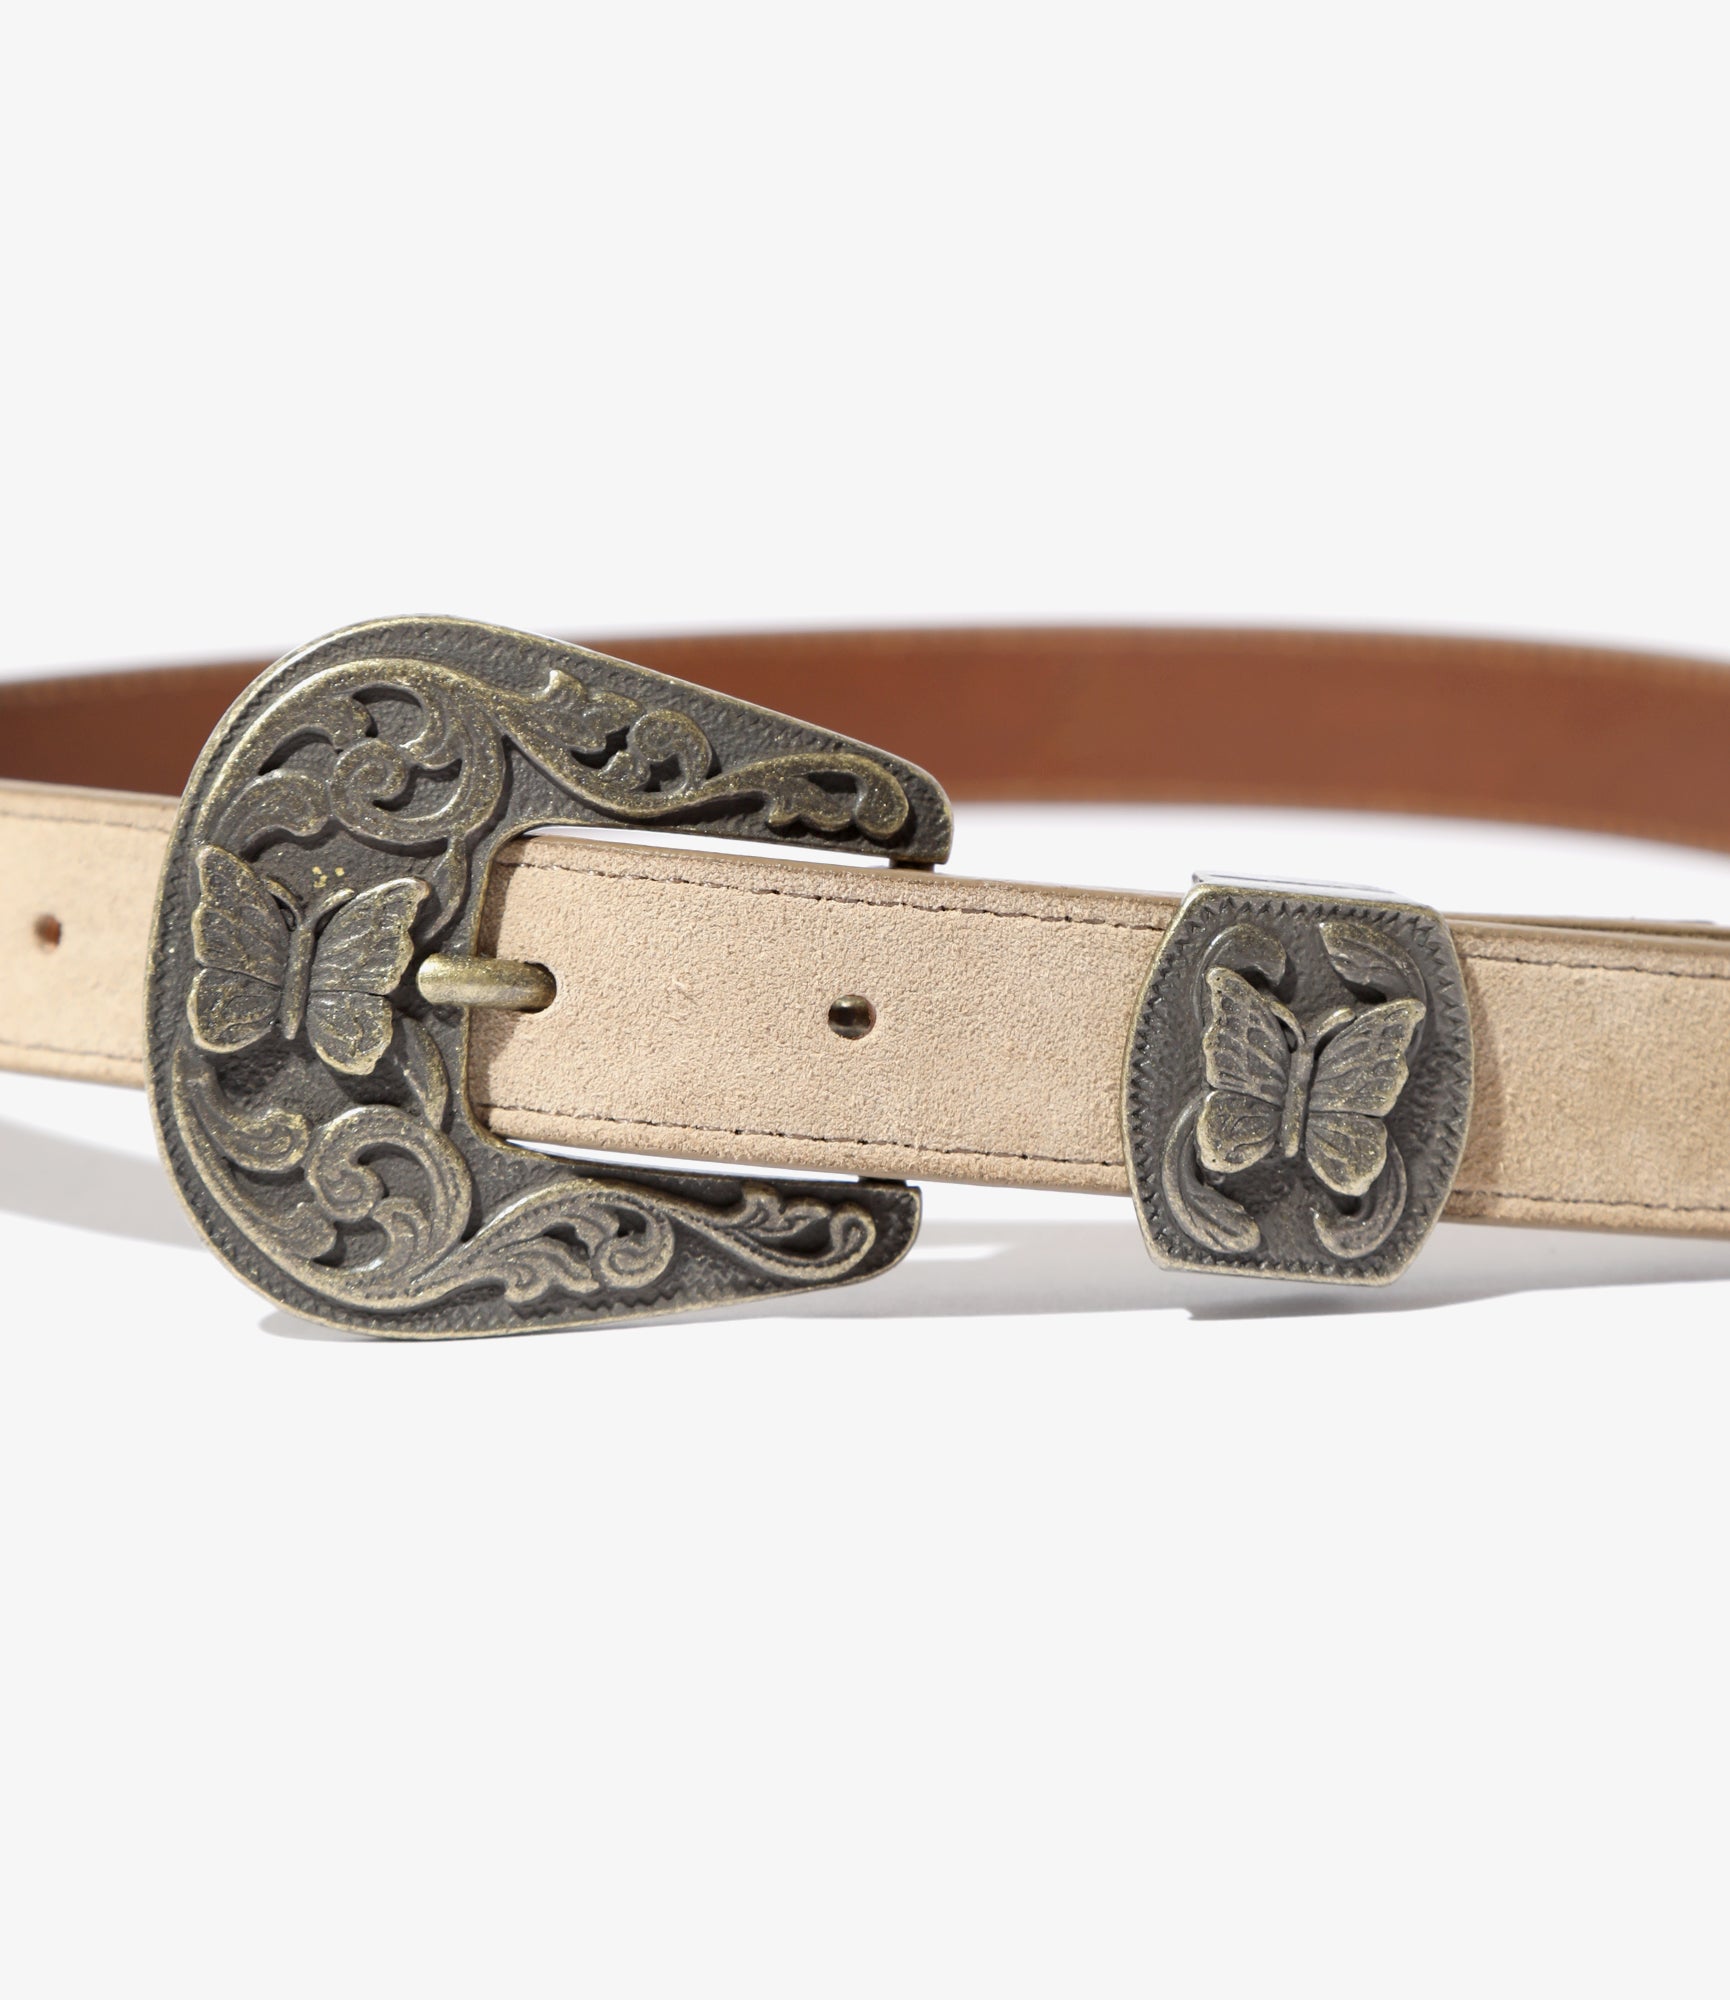 Needles Papillon Western Tip Belt - Suede Leather - Taupe